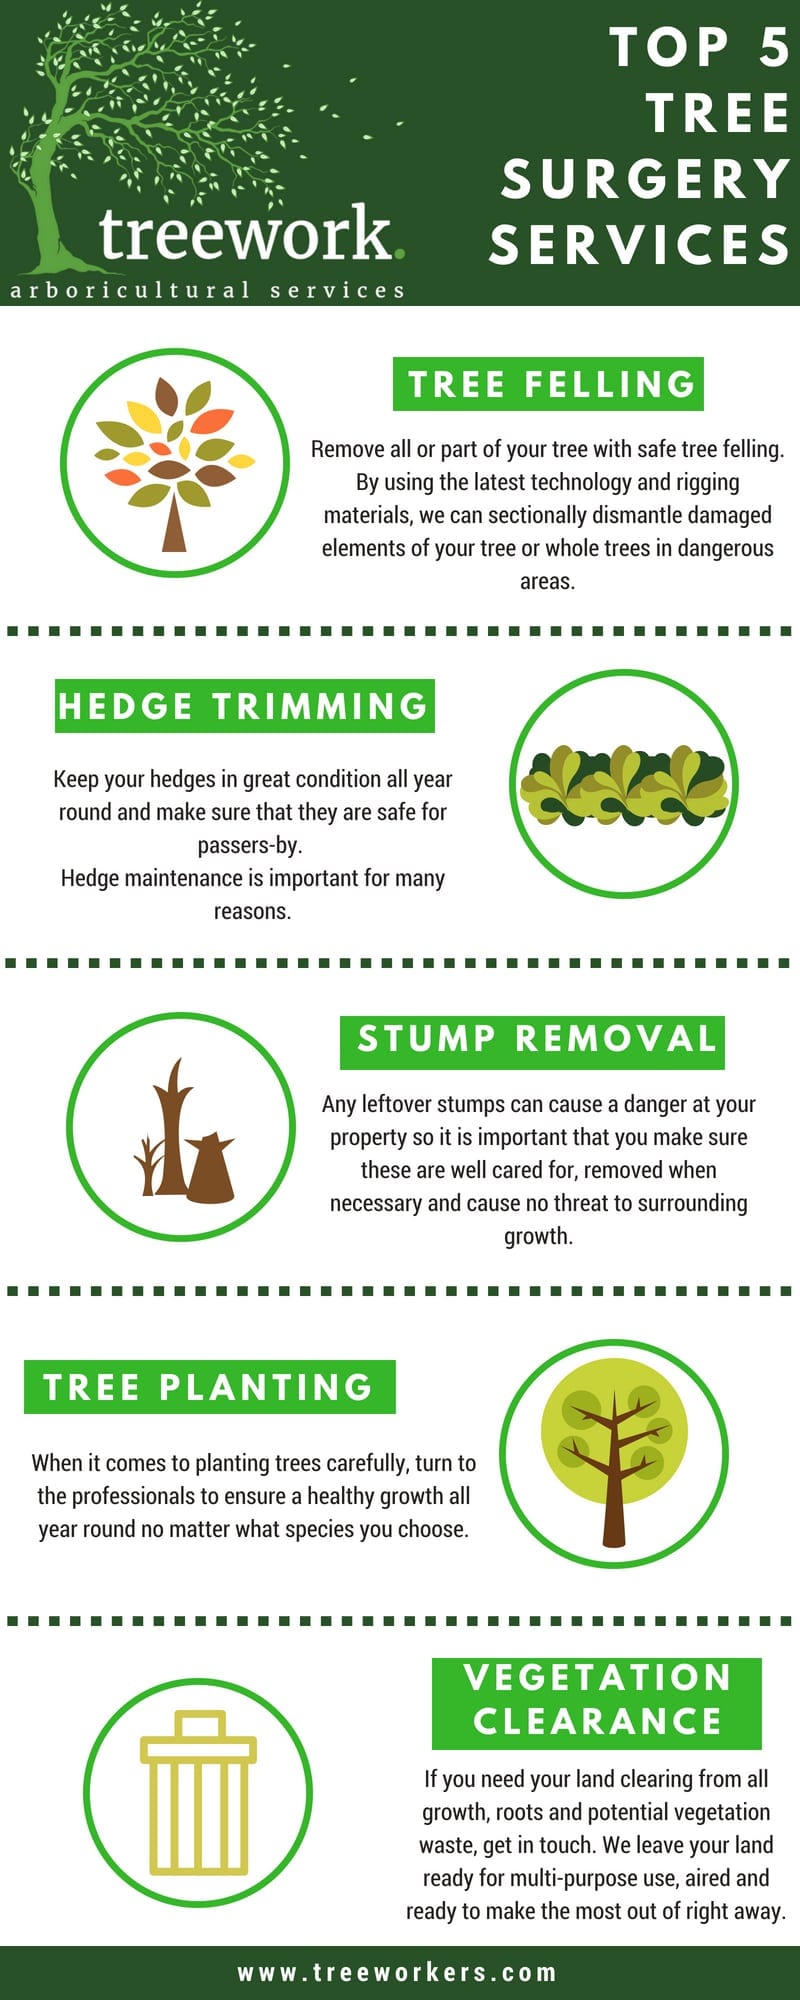 Top 5 Tree Surgery Services Leaflet